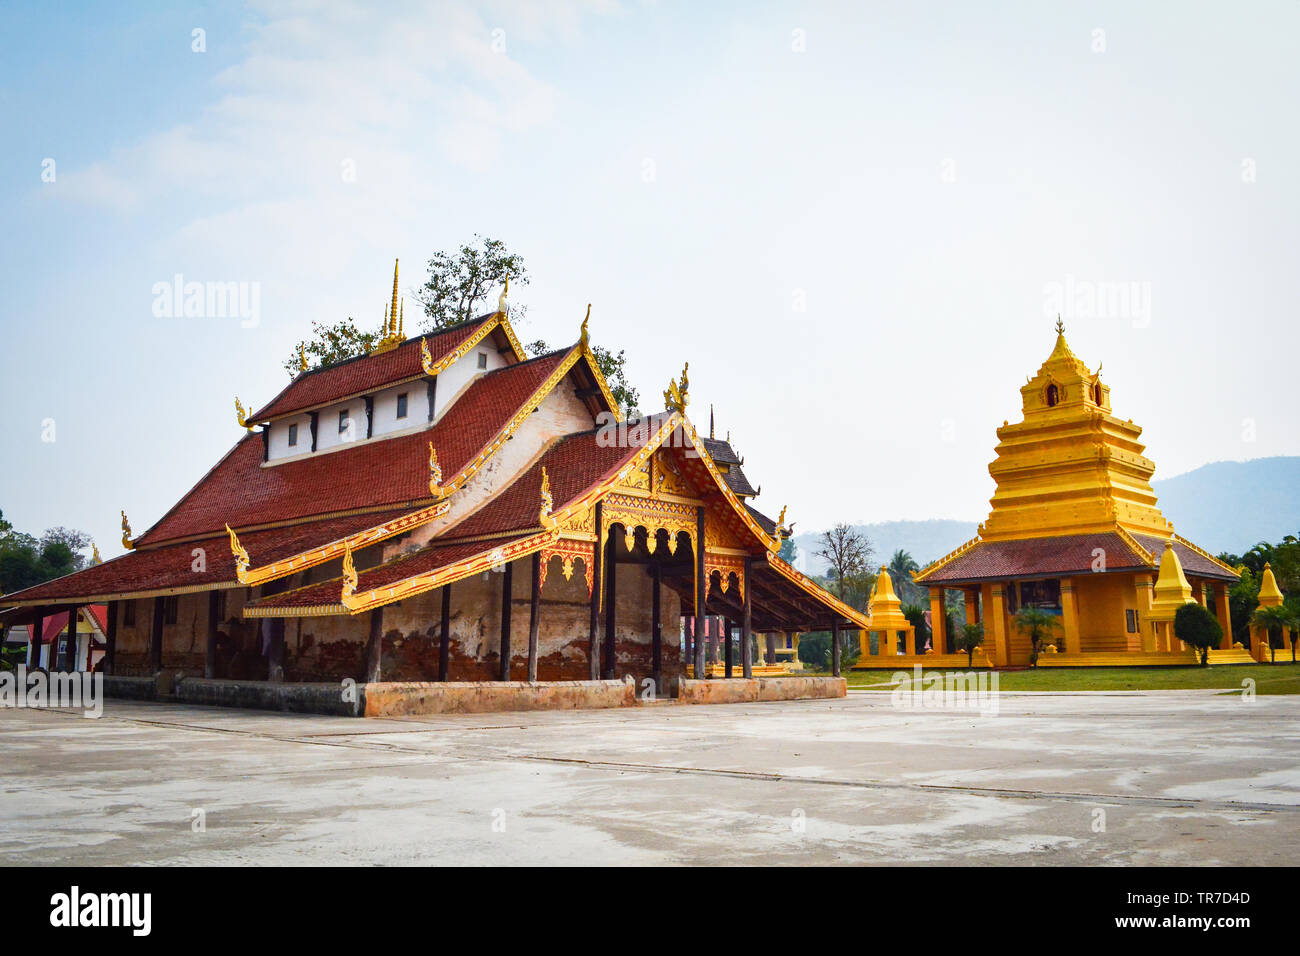 Old temple in Thailand / The story ancient temple of is over 400 years old landmark of buddhist - Wat Sri Pho Chai at Na Haeo Loei Thailand - naheaw Stock Photo